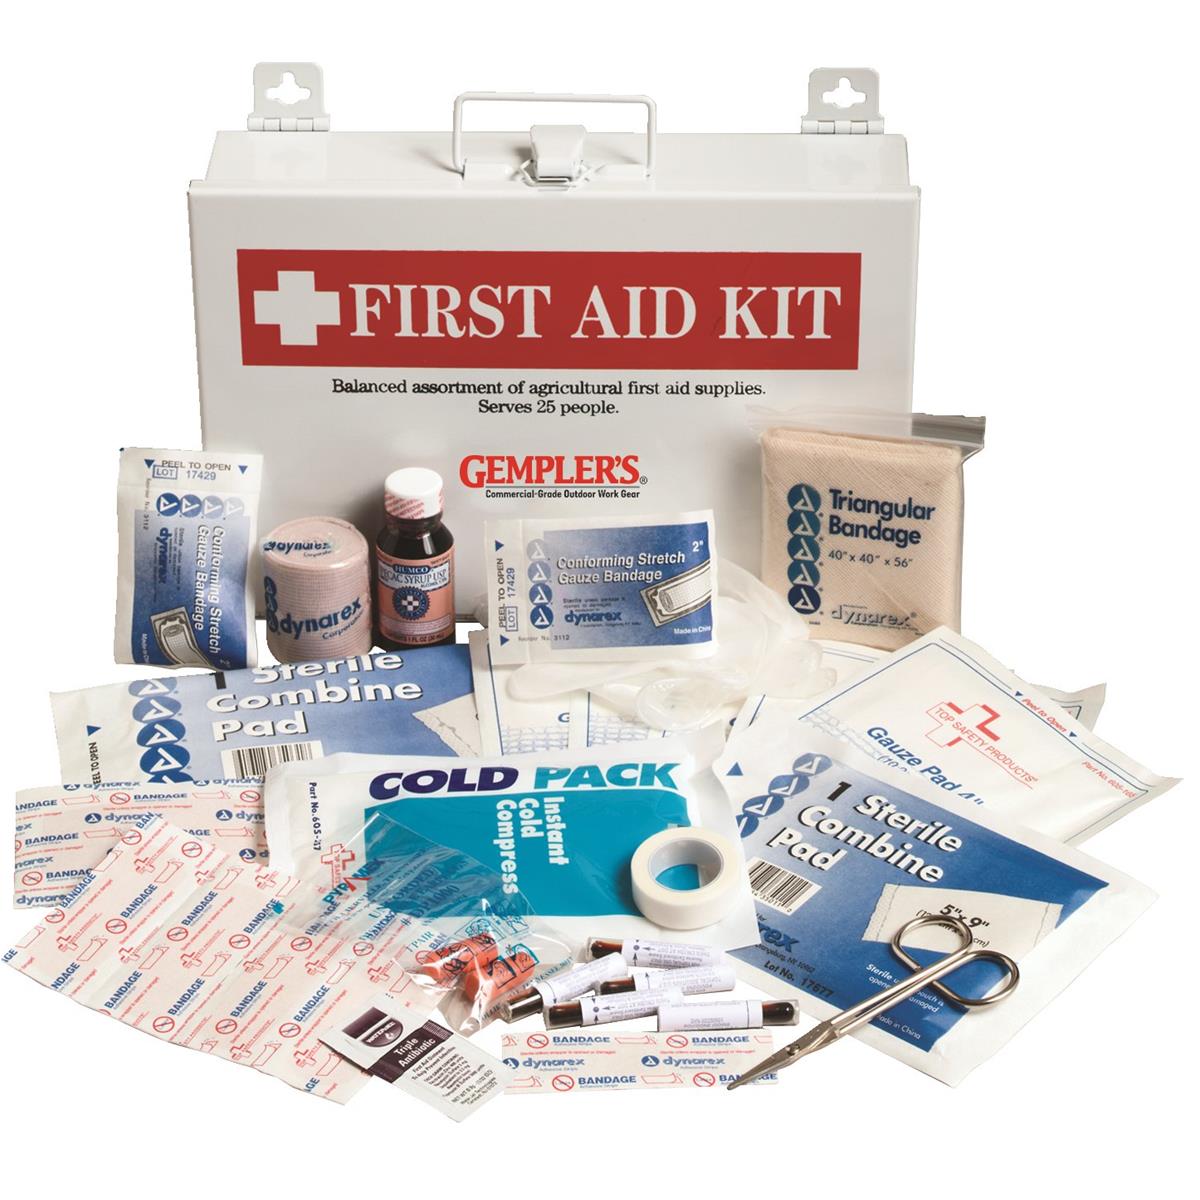 materials in first aid